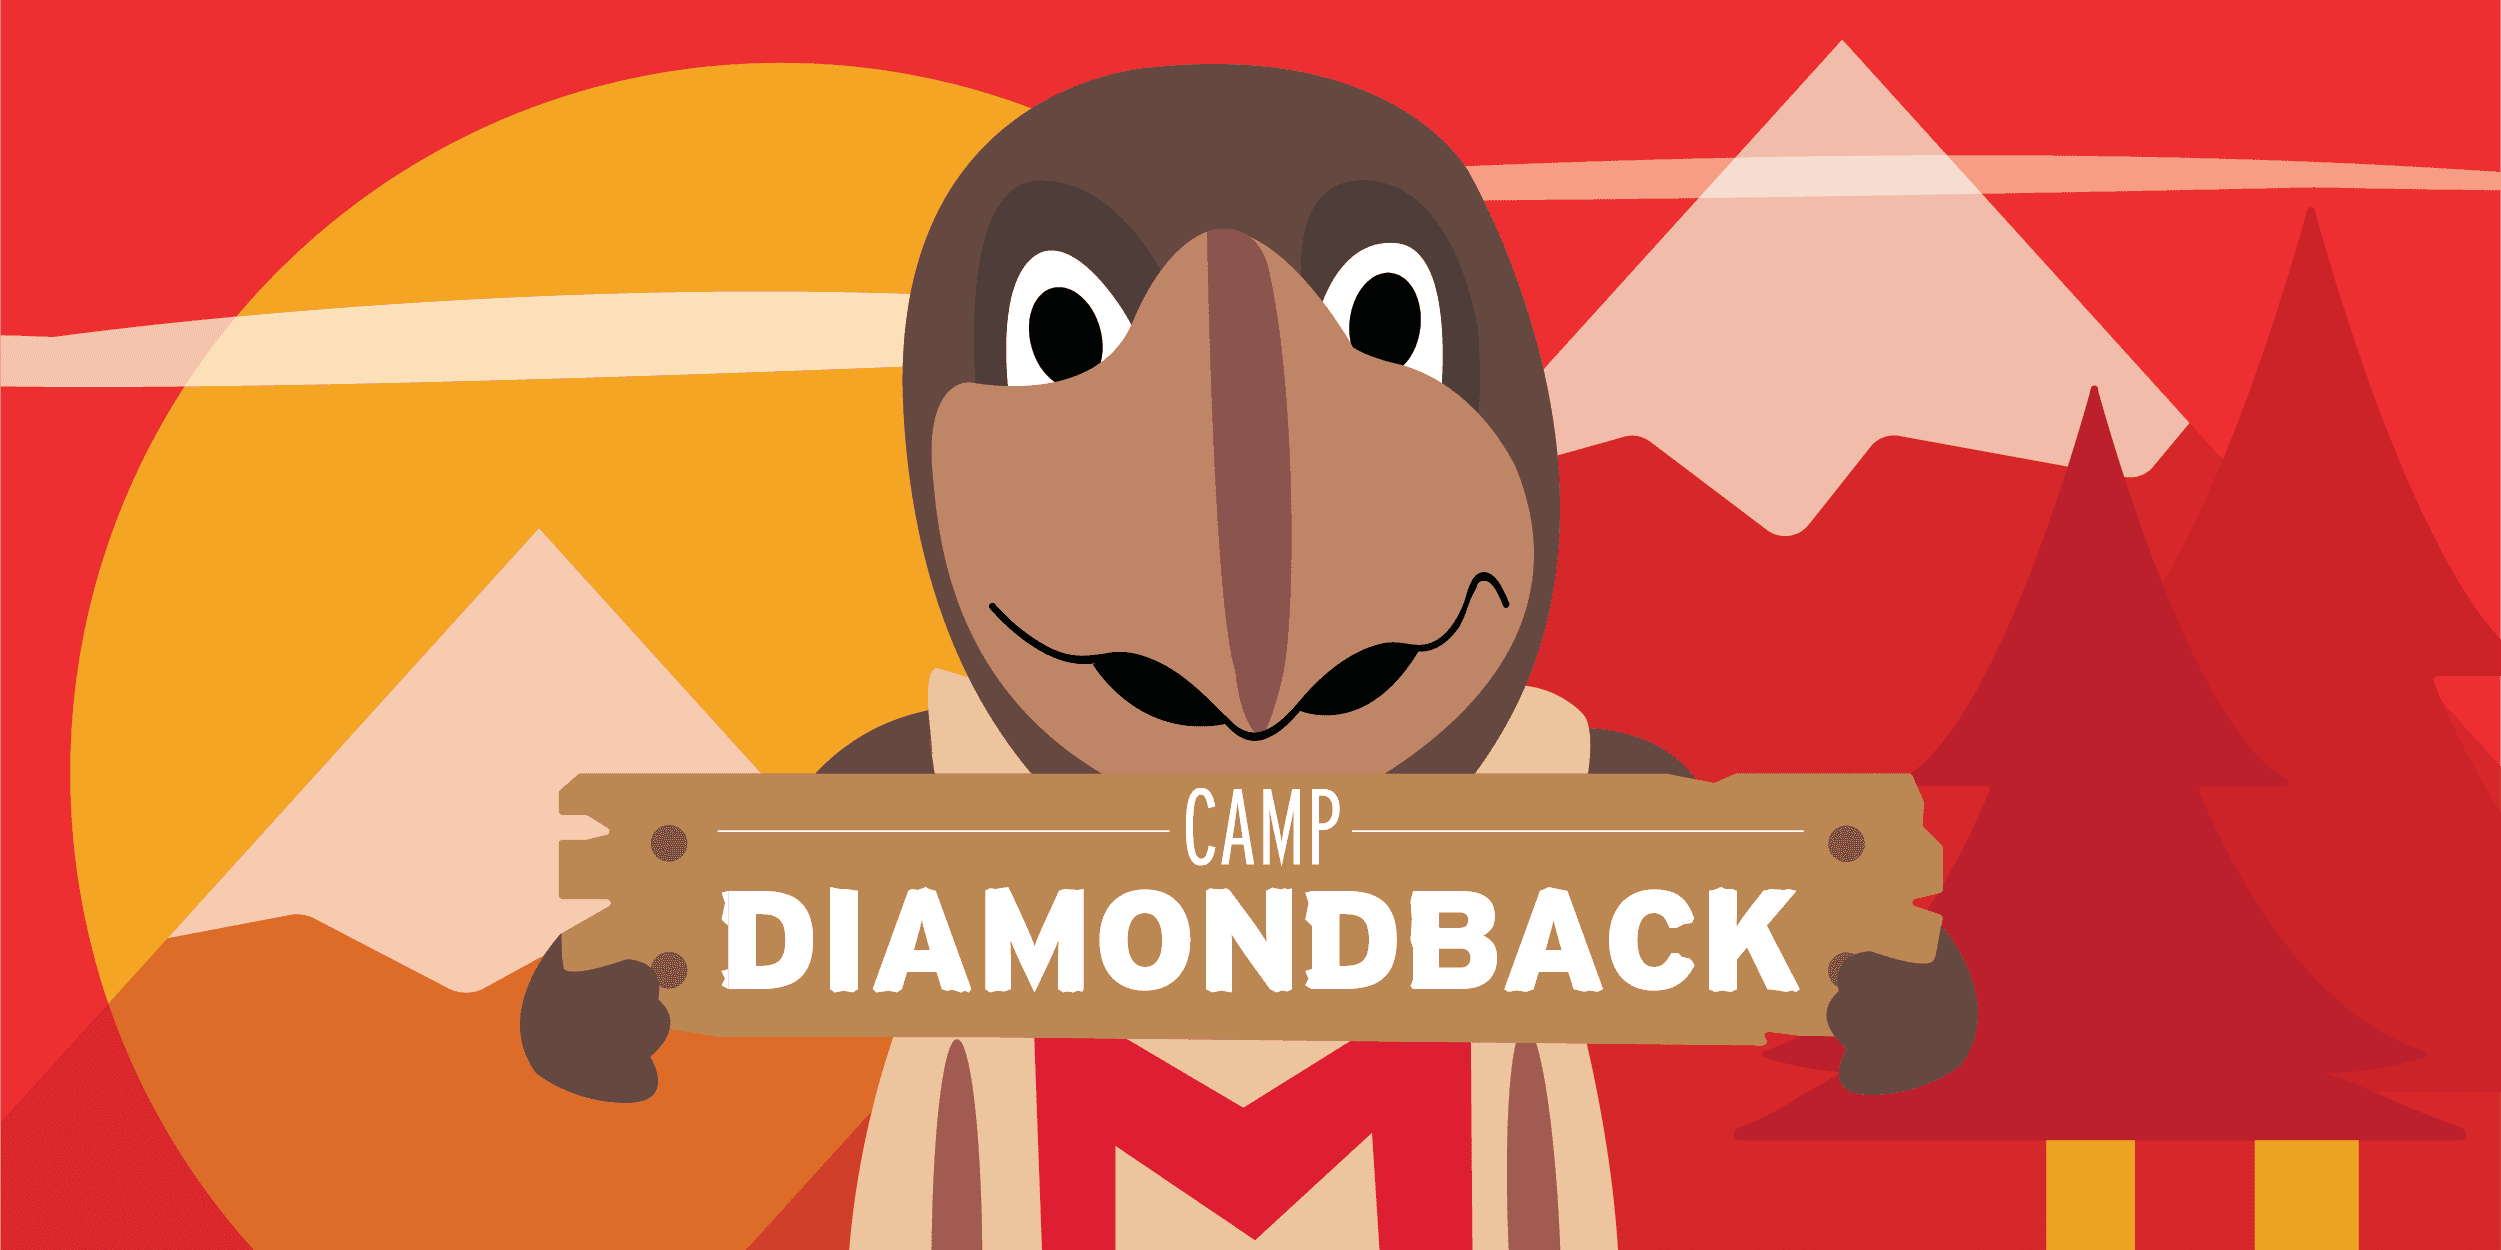 Testudo illustration with sun and mountains behind him while he is holding a sign that reads Camp Diamondback